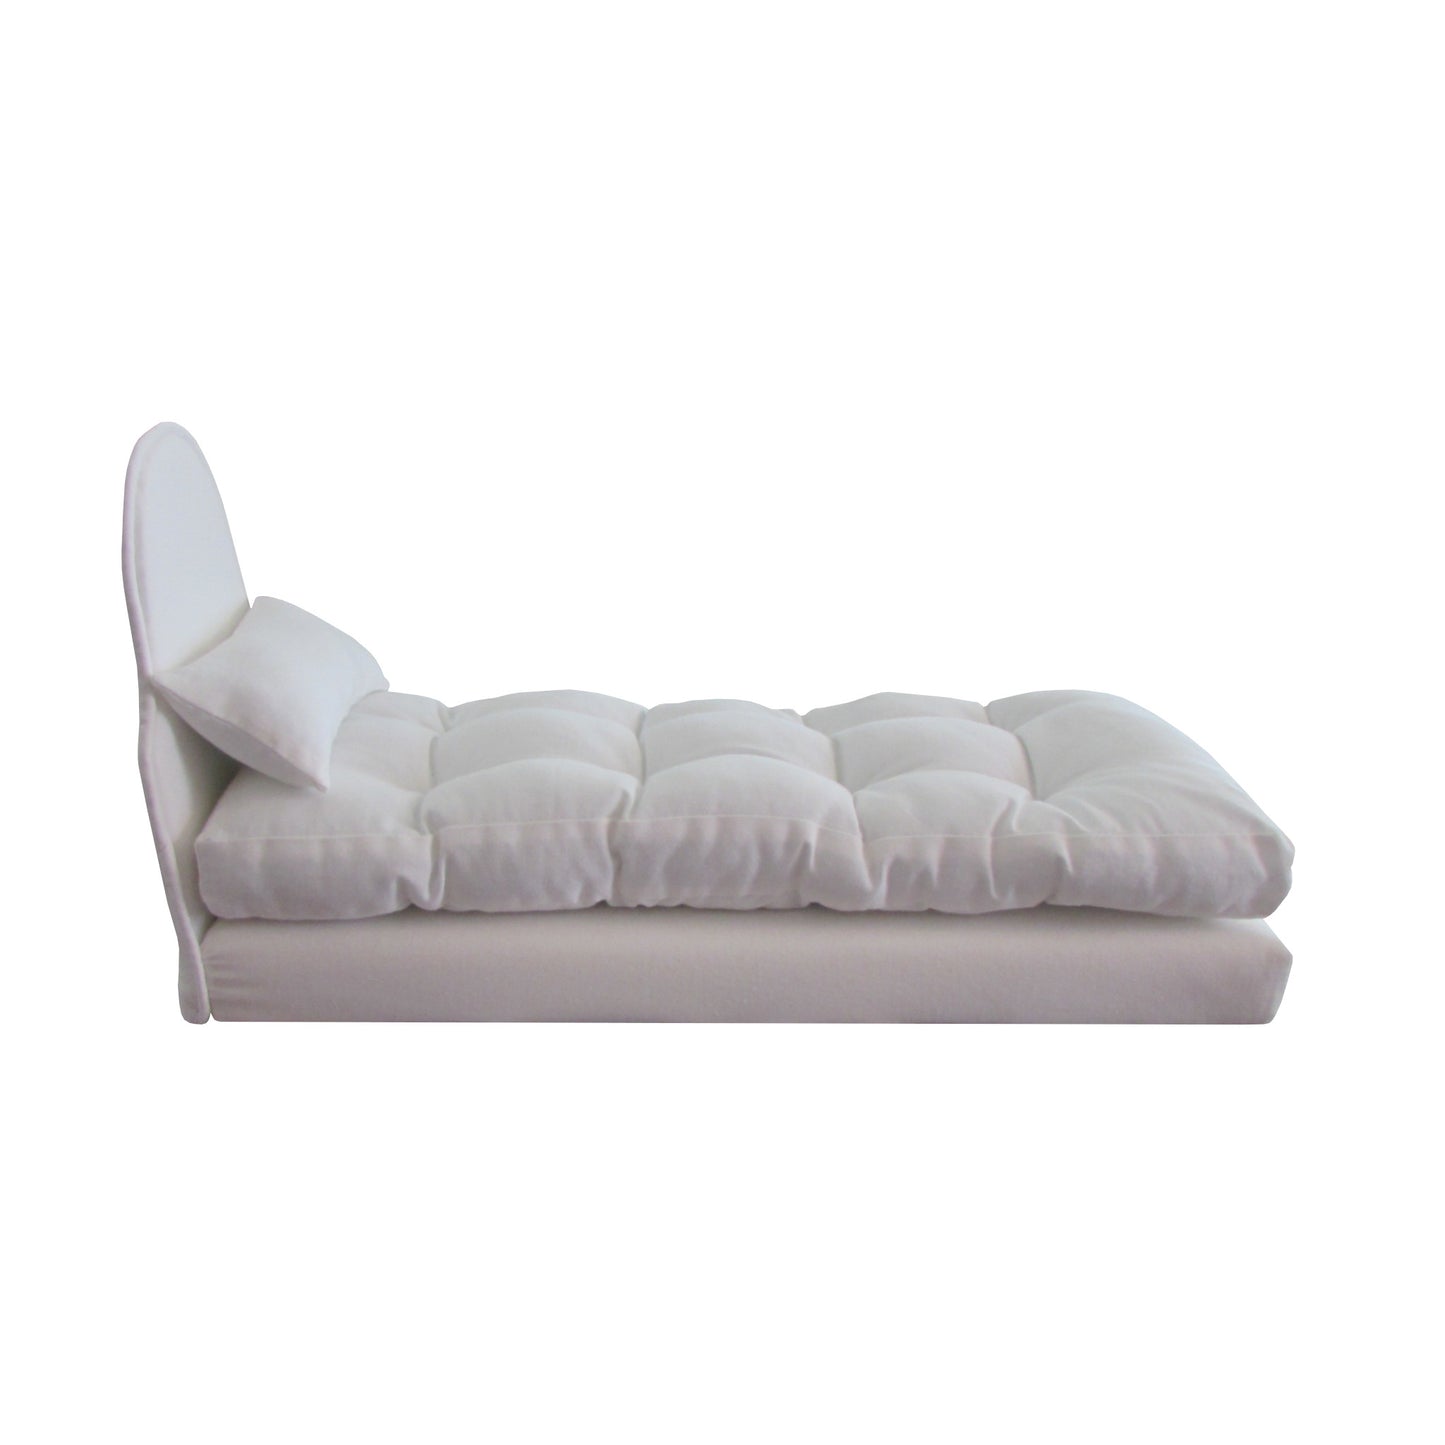 Upholstered White Doll Bed and Mattress for 11.5-inch and 12-inch dolls Side view